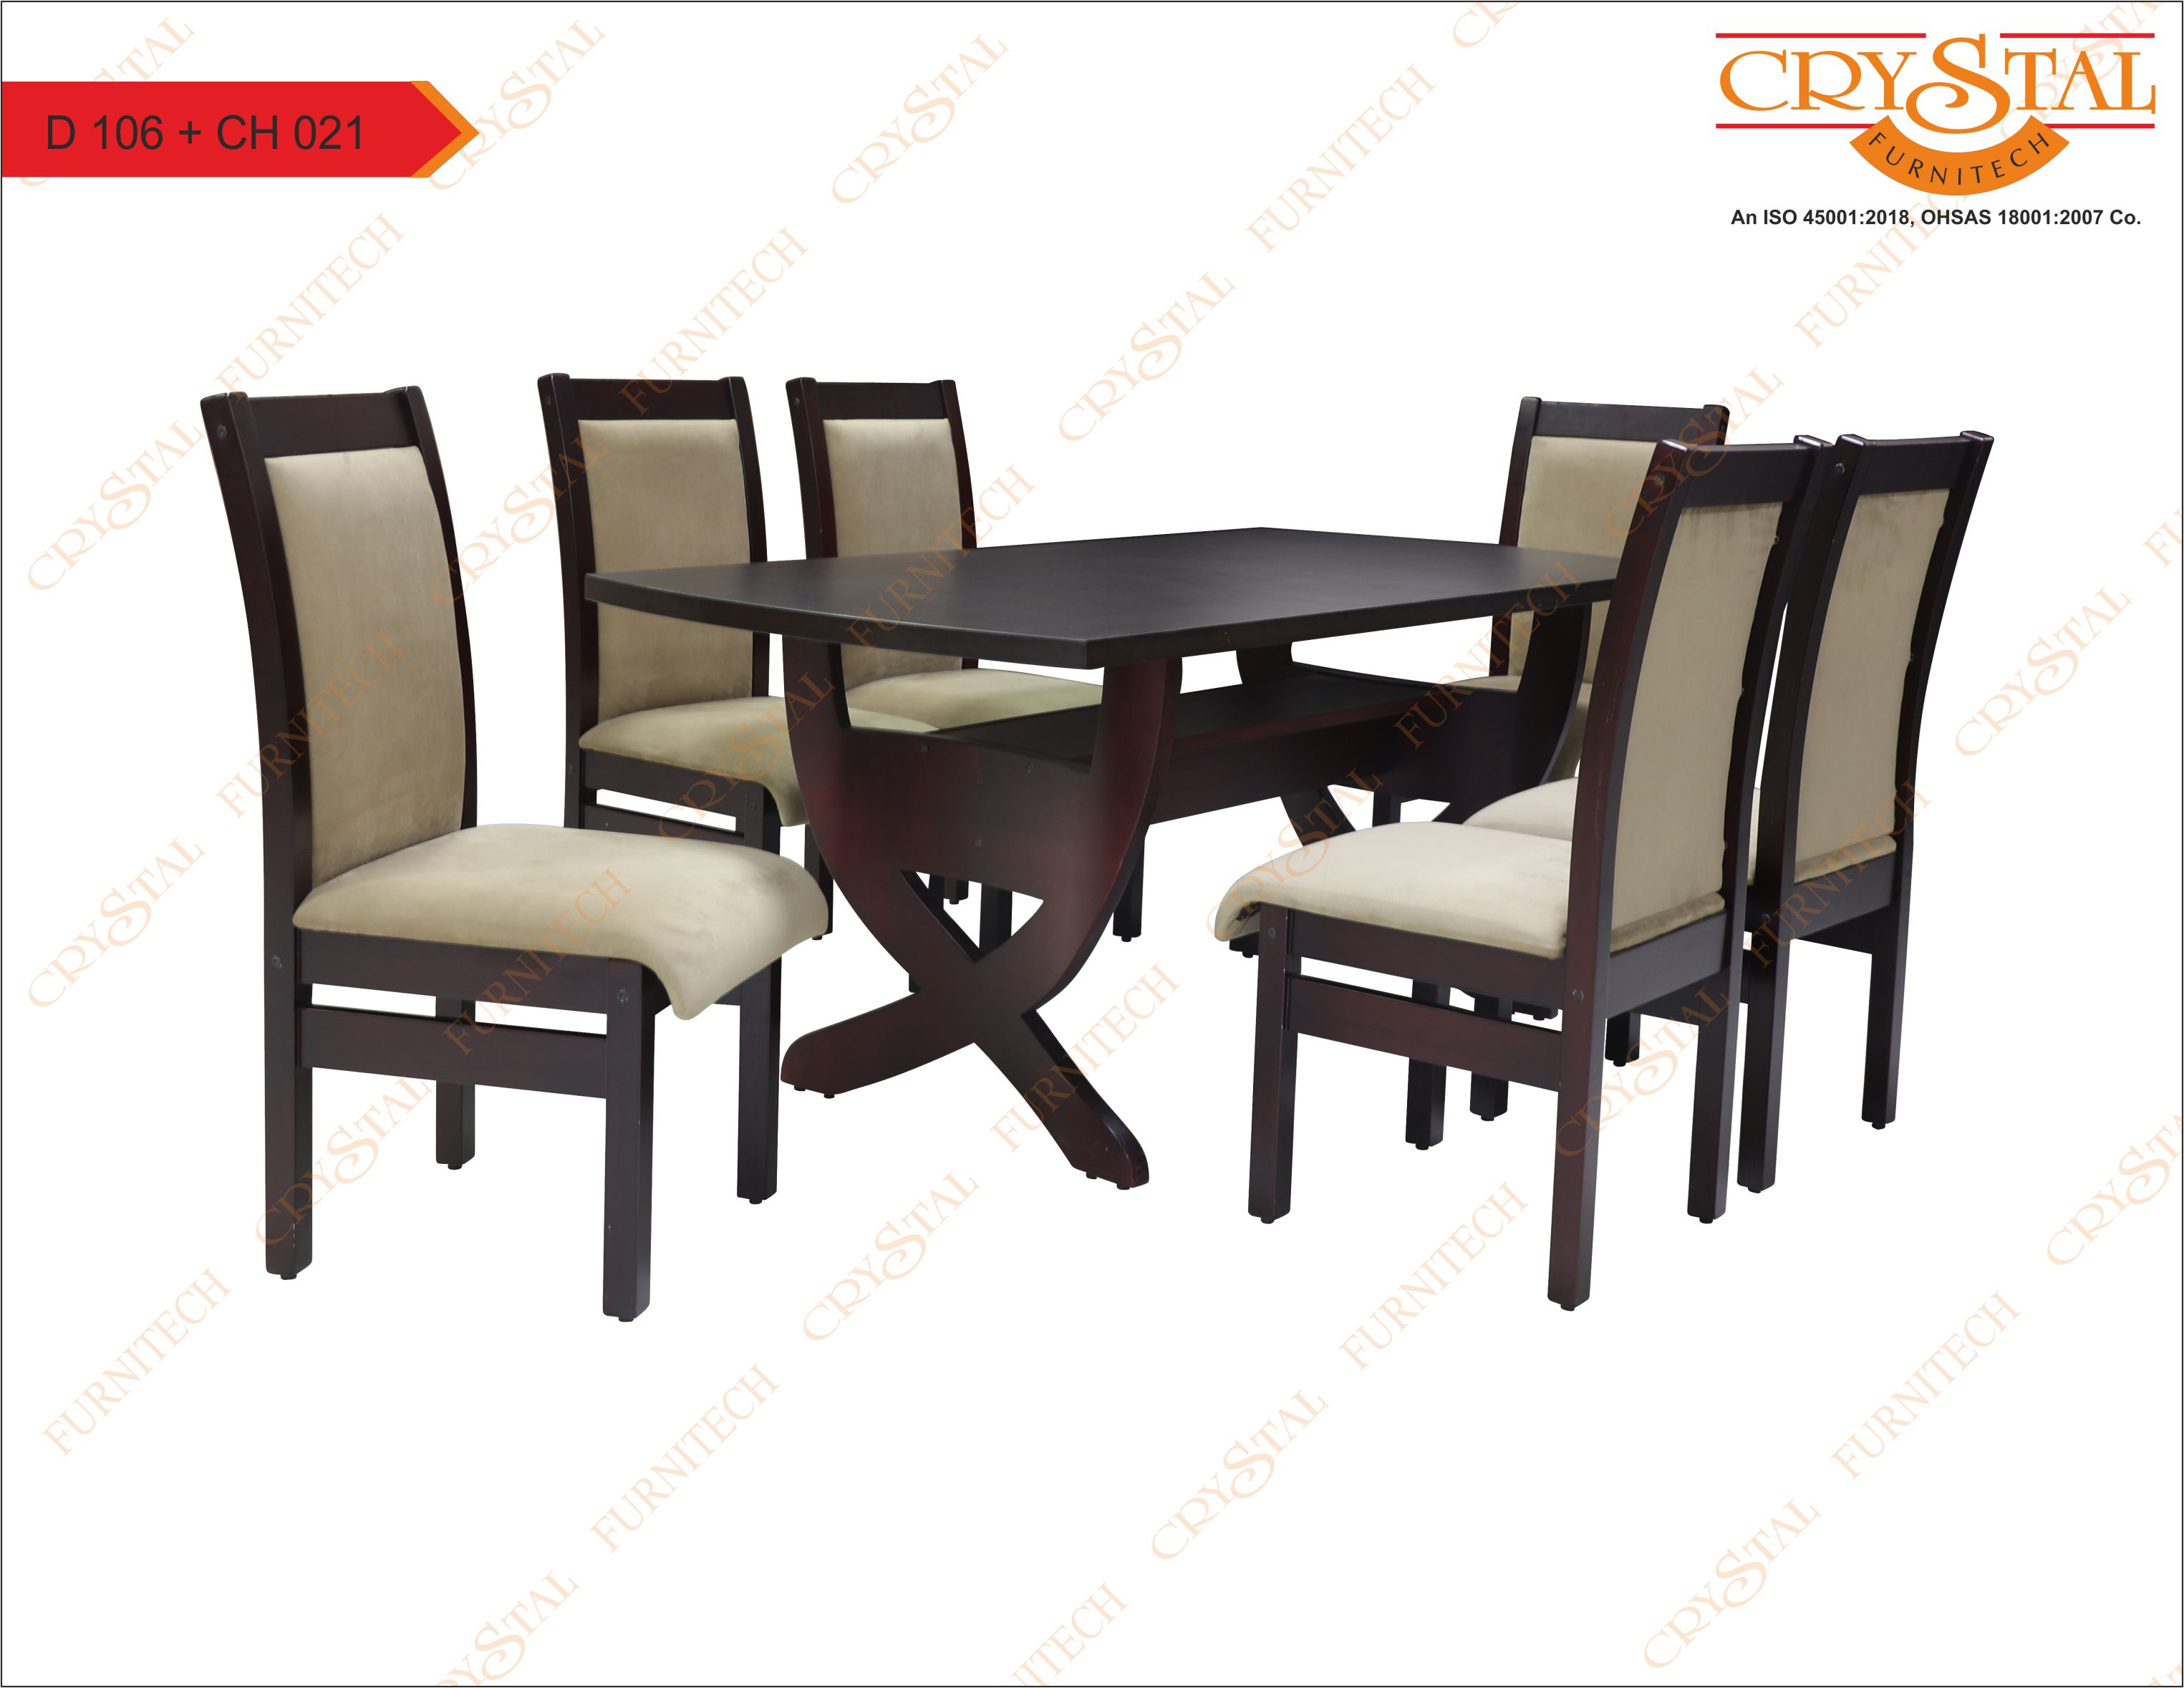 images/products/Dining-Set-Dining-Set-D-106+CH021_1657002364.jpg